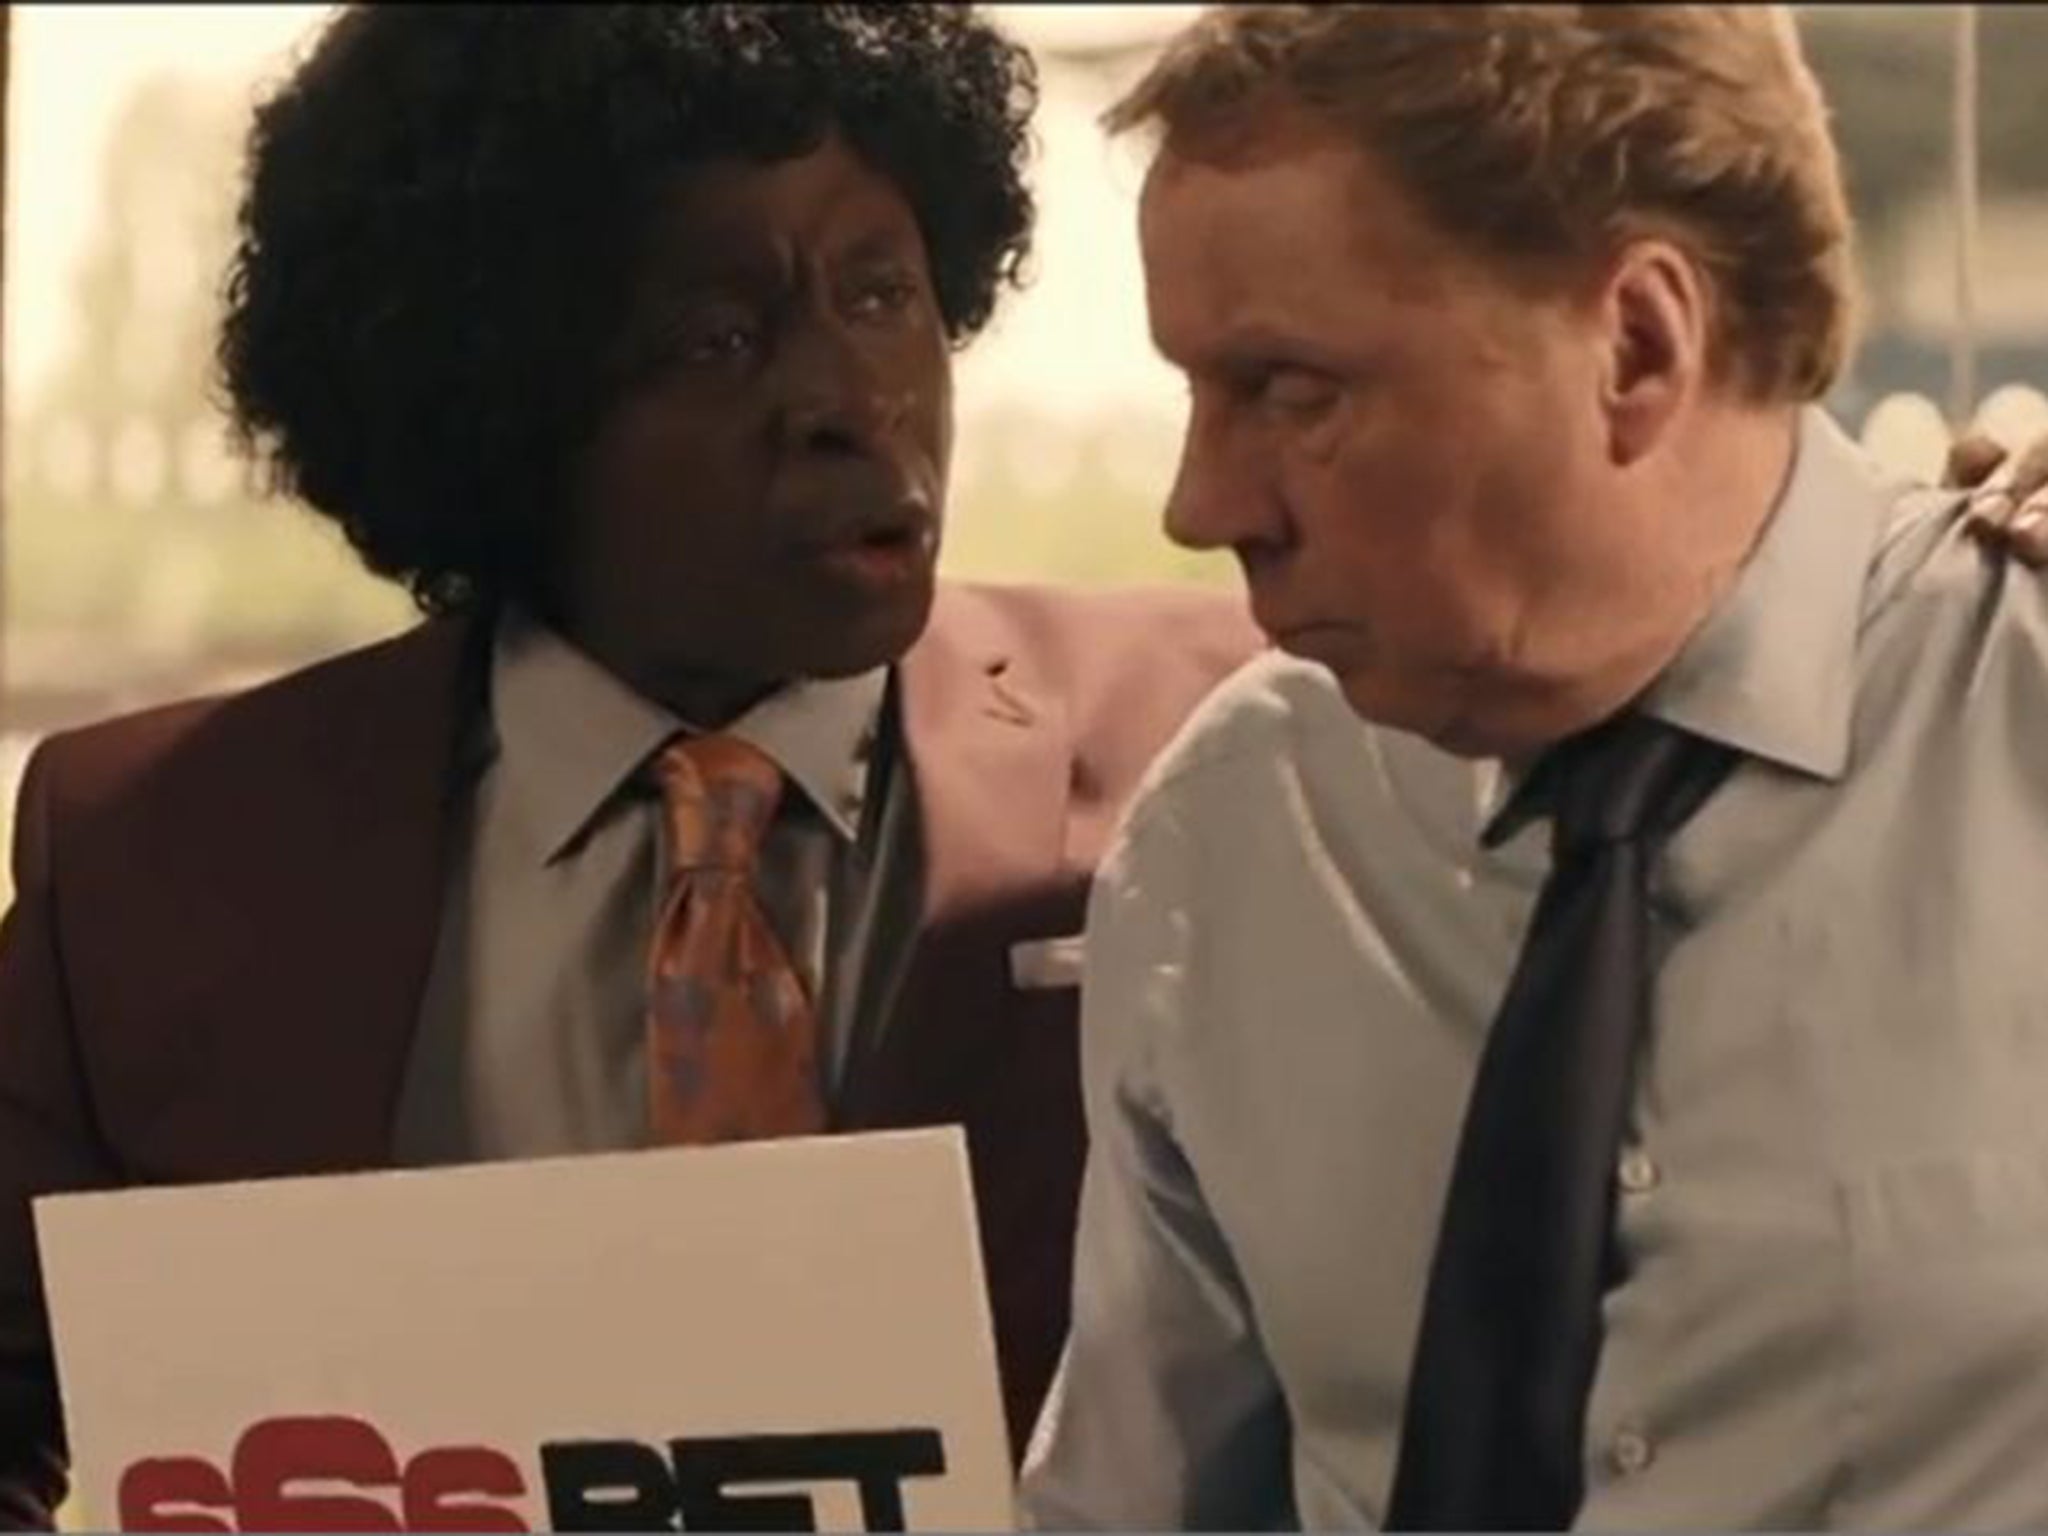 The television advertisement for 666Bet, featuring Vas Blackwood, left, and former football manager Harry Redknapp